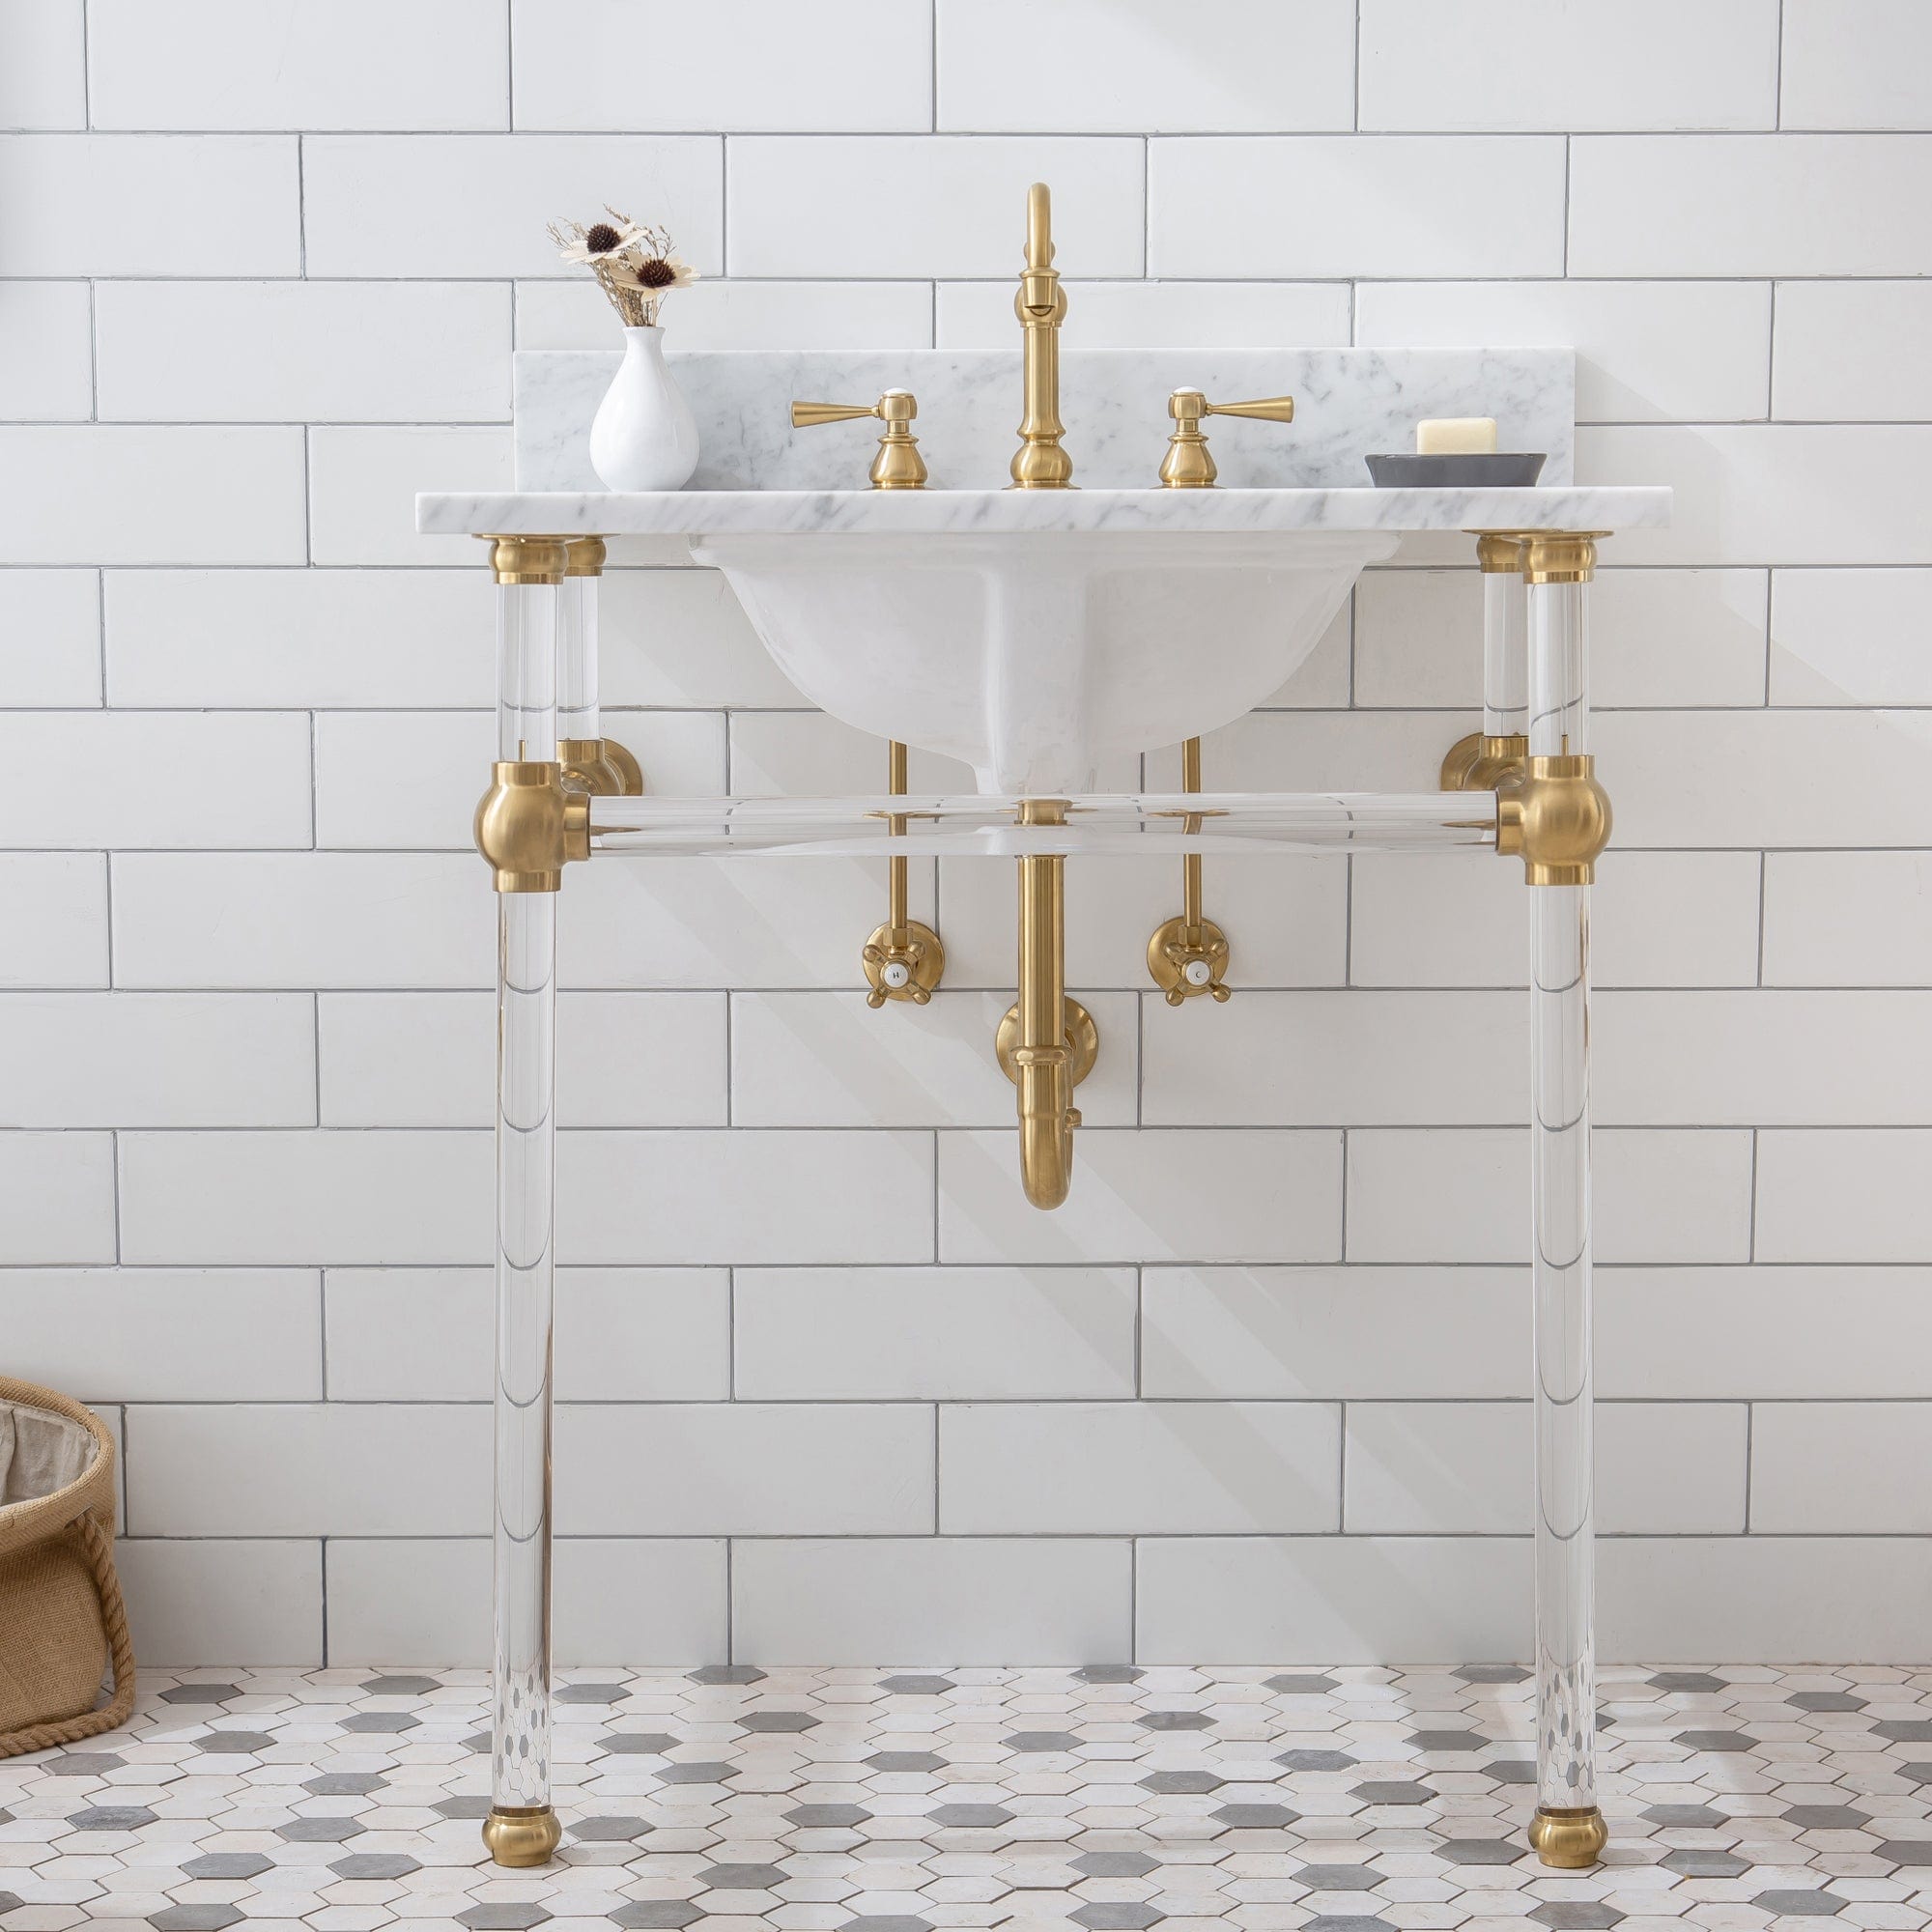 Empire 30 Inch Wide Single Wash Stand, P-Trap, Counter Top with Basin, F2-0012 Faucet and Mirror included in Satin Gold Finish - Molaix732030762725EP30E-0612